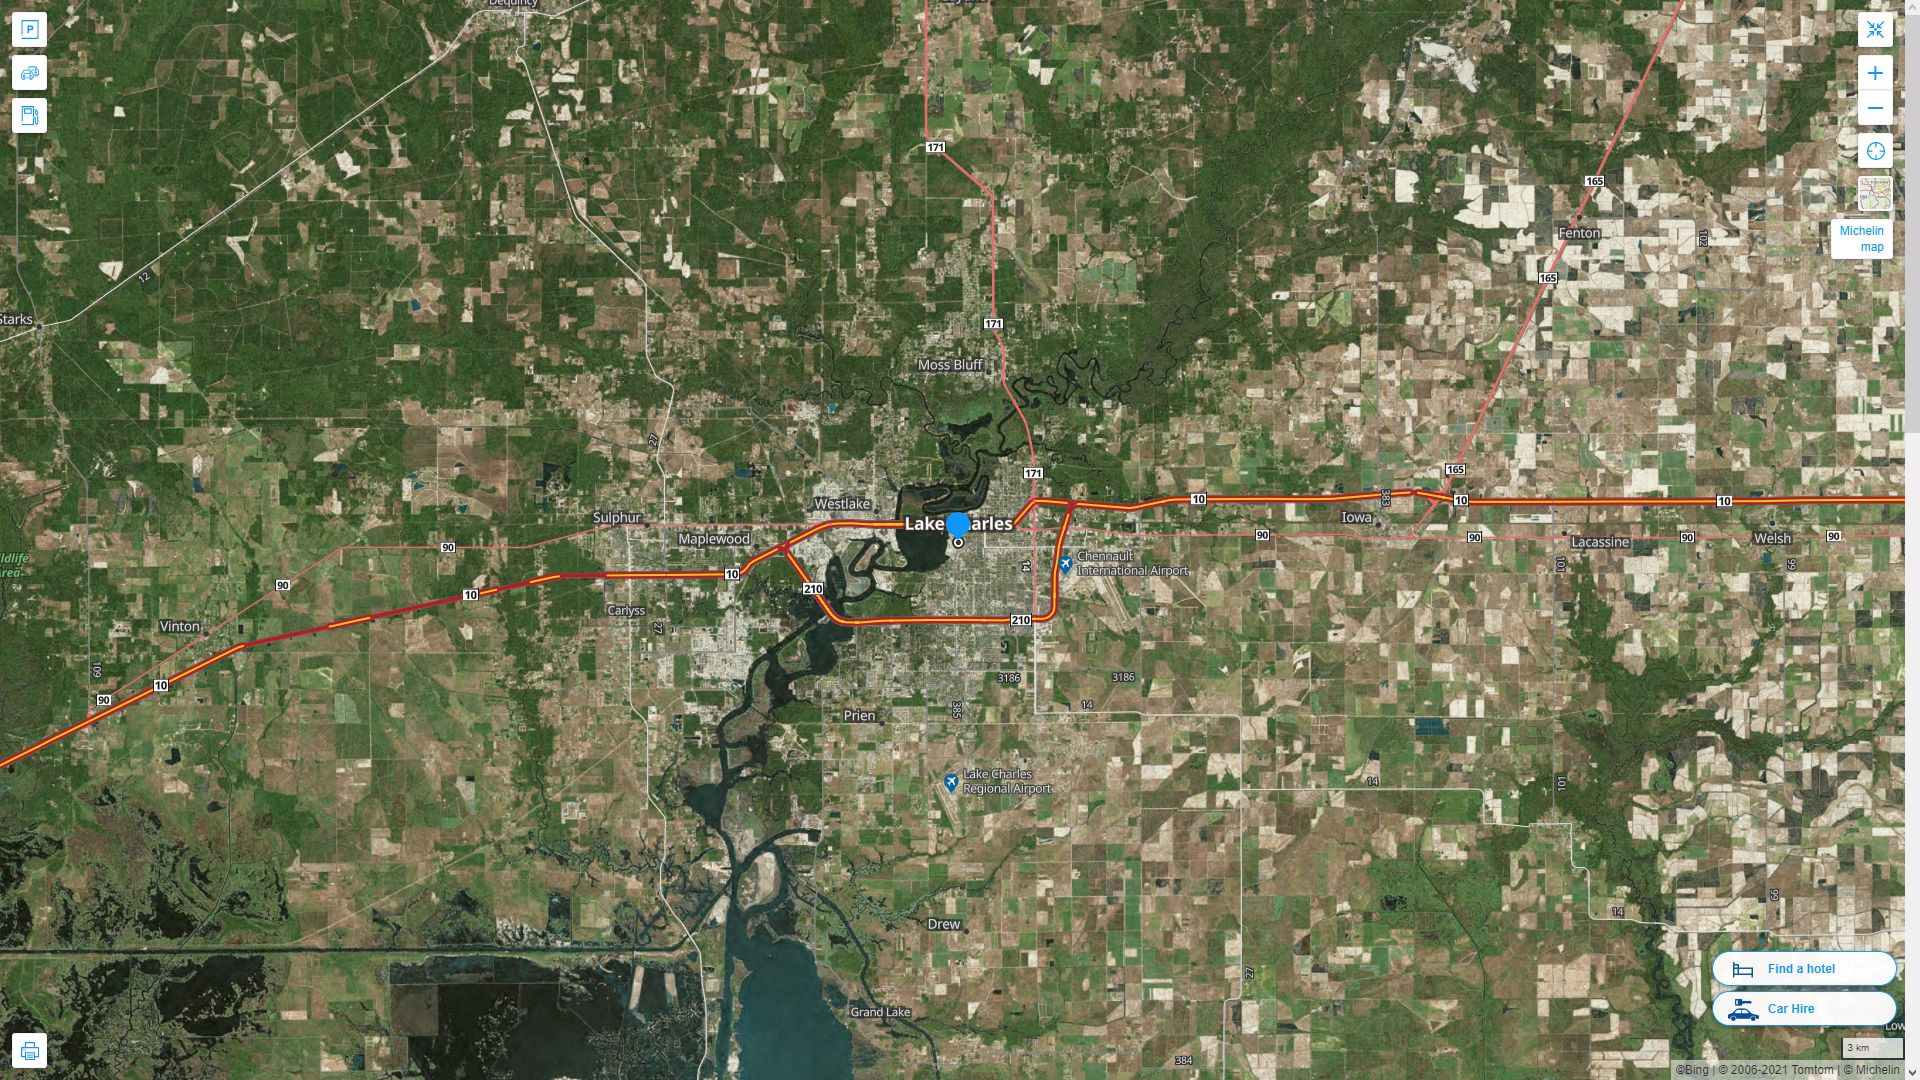 Lake Charles Louisiana Highway and Road Map with Satellite View